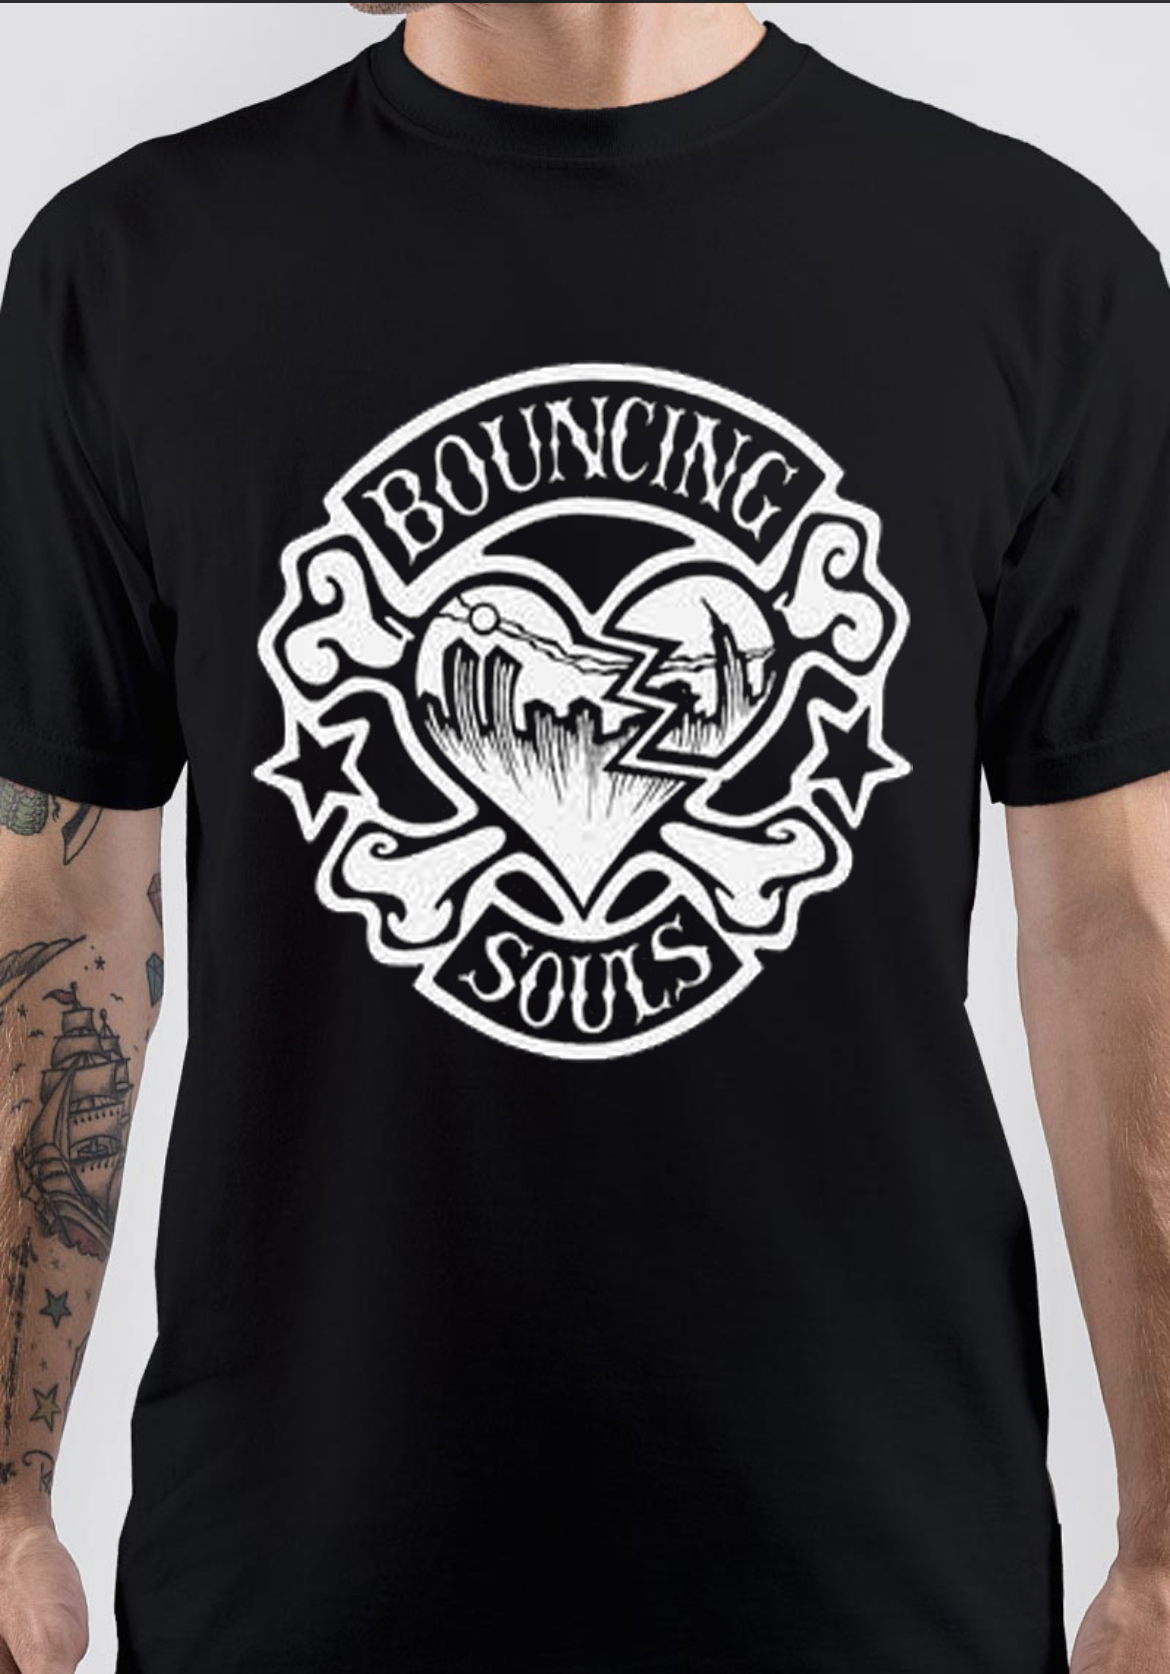 The Bouncing Souls T-Shirt And Merchandise